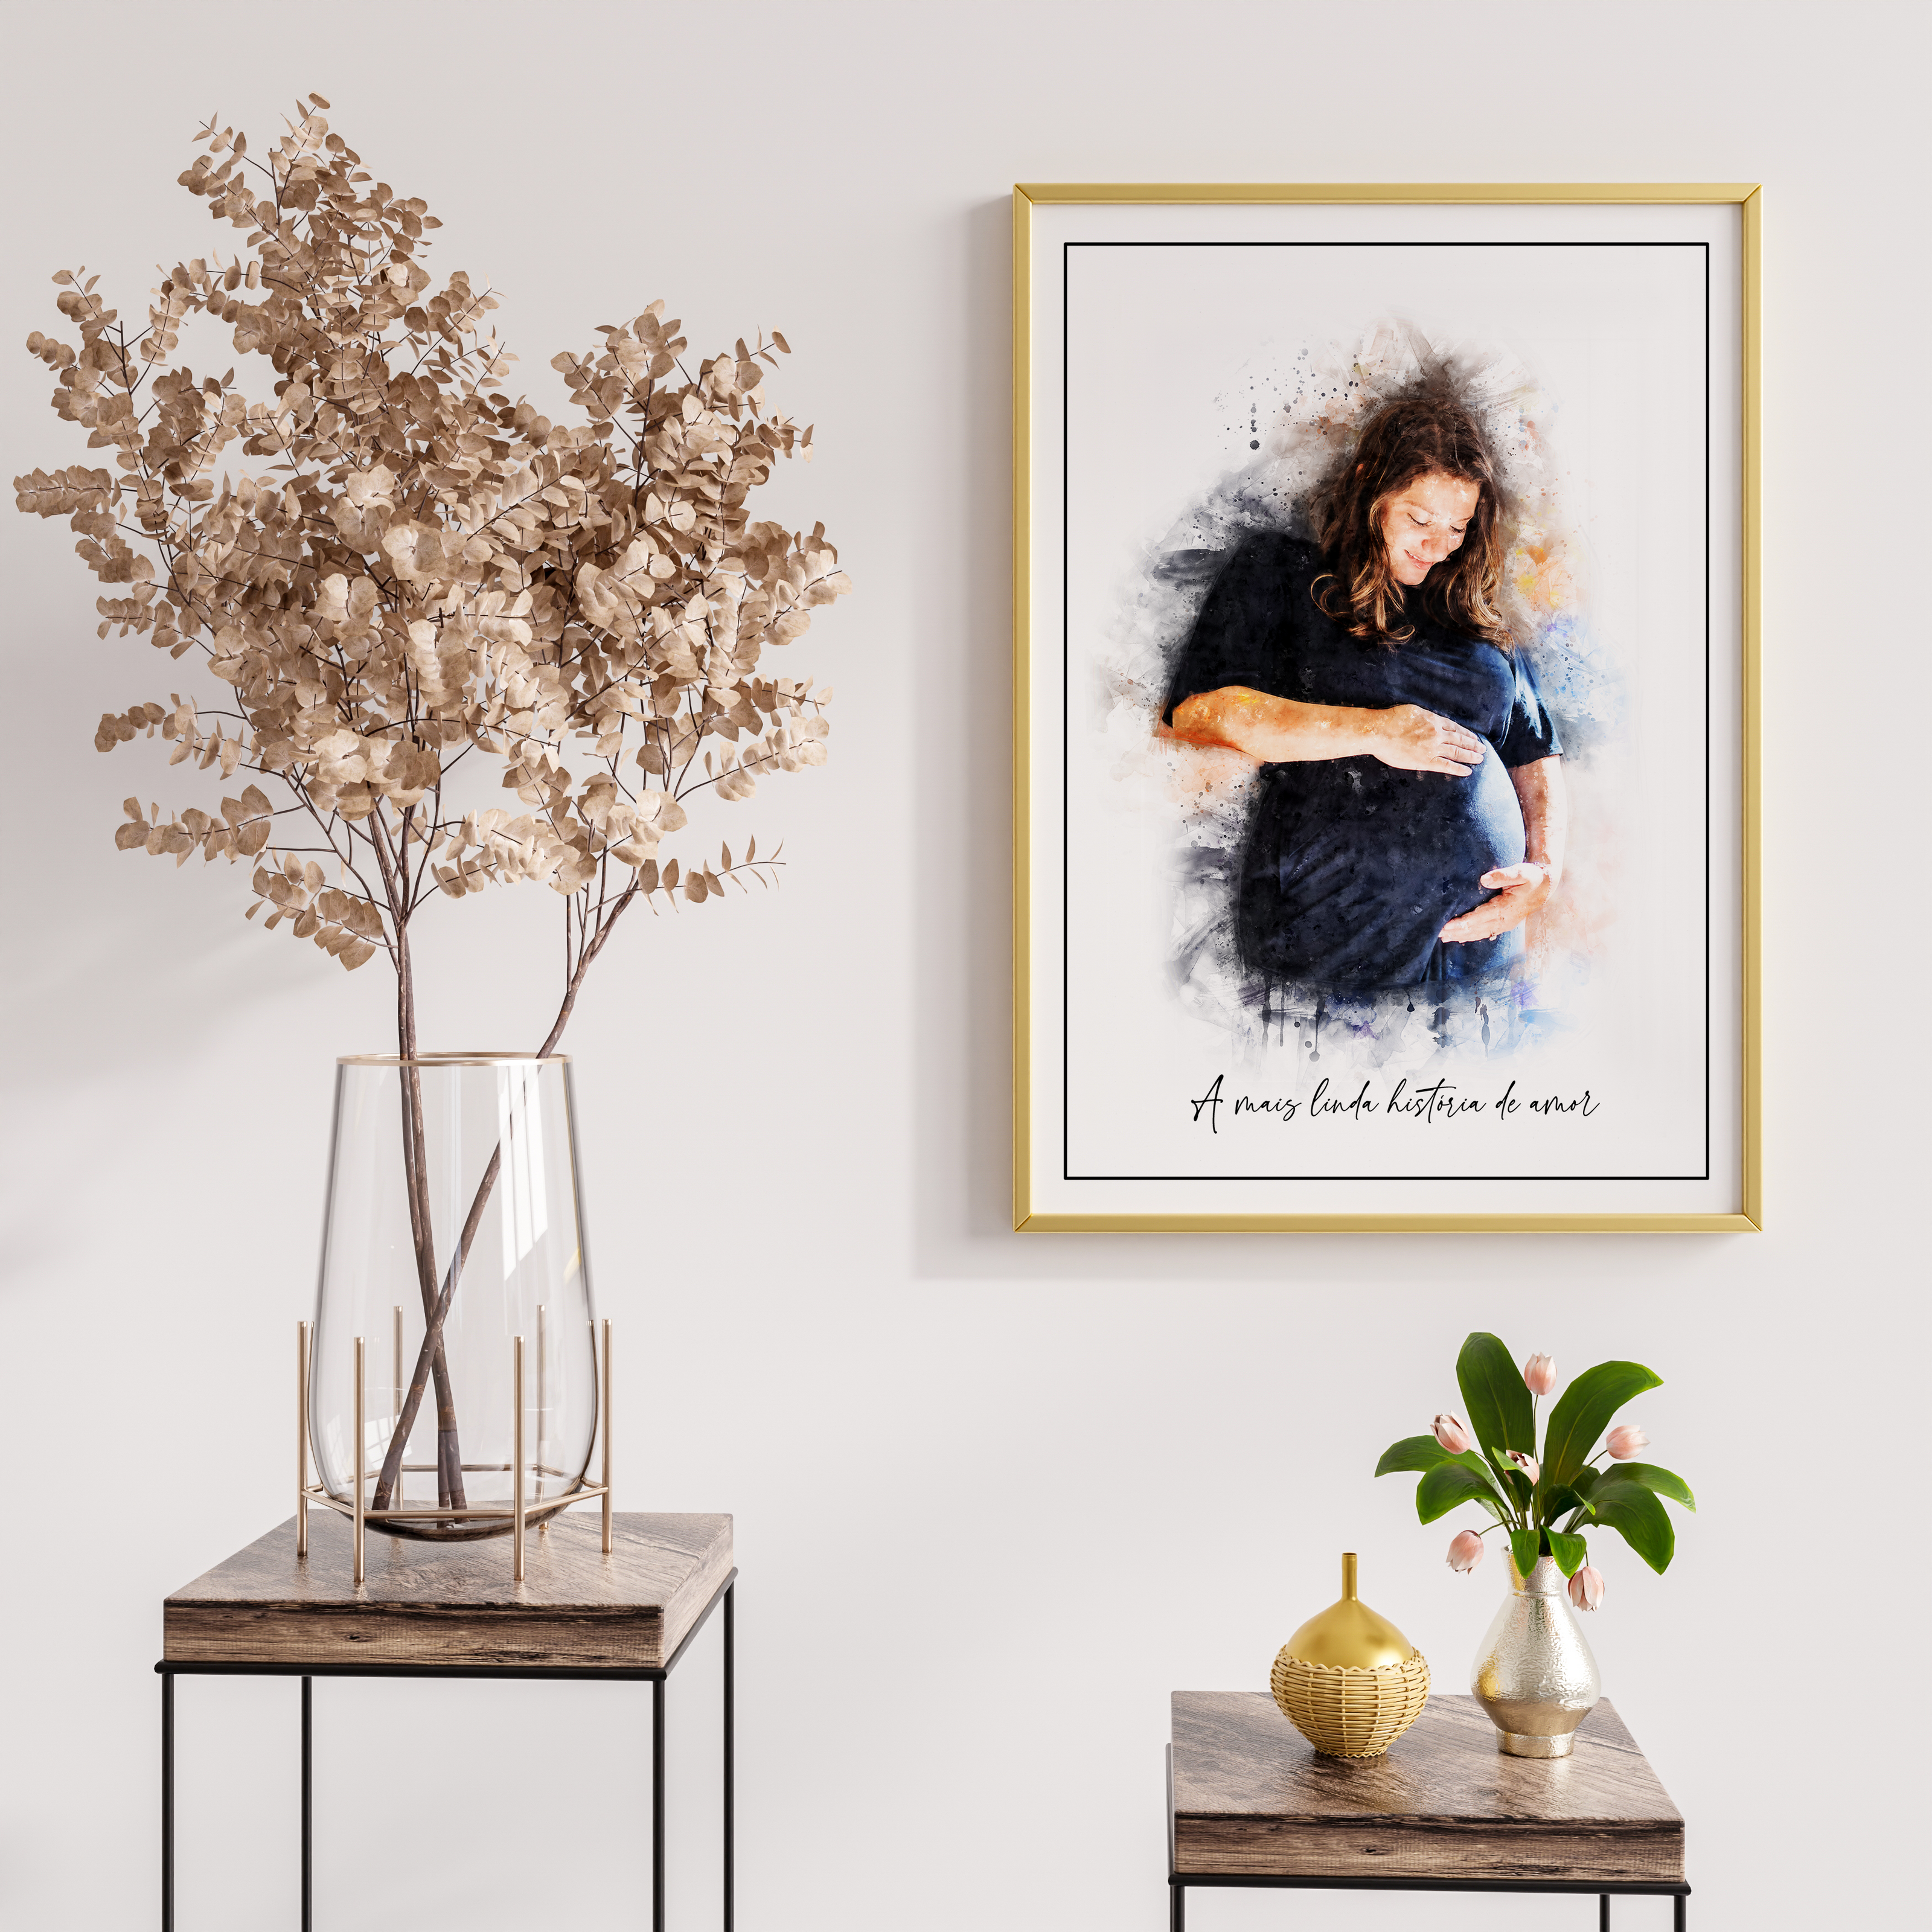 Wall art of a pregnant woman portrait in watercolour painting style